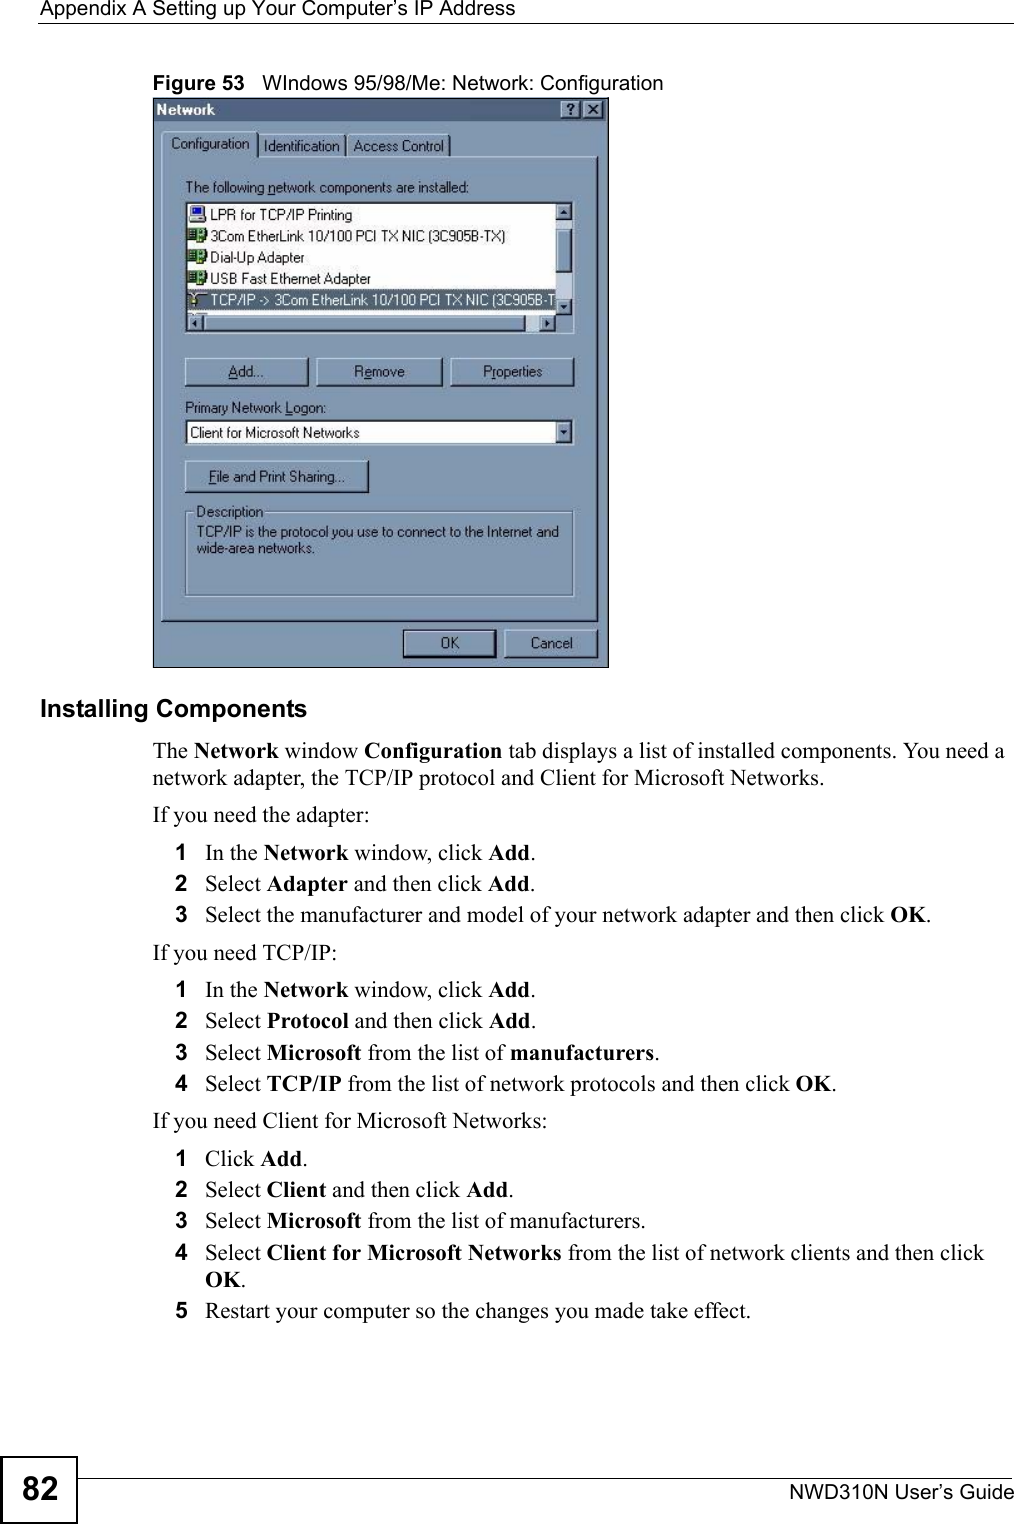 Appendix A Setting up Your Computer’s IP AddressNWD310N User’s Guide82Figure 53   WIndows 95/98/Me: Network: ConfigurationInstalling ComponentsThe Network window Configuration tab displays a list of installed components. You need a network adapter, the TCP/IP protocol and Client for Microsoft Networks.If you need the adapter:1In the Network window, click Add.2Select Adapter and then click Add.3Select the manufacturer and model of your network adapter and then click OK.If you need TCP/IP:1In the Network window, click Add.2Select Protocol and then click Add.3Select Microsoft from the list of manufacturers.4Select TCP/IP from the list of network protocols and then click OK.If you need Client for Microsoft Networks:1Click Add.2Select Client and then click Add.3Select Microsoft from the list of manufacturers.4Select Client for Microsoft Networks from the list of network clients and then click OK.5Restart your computer so the changes you made take effect.